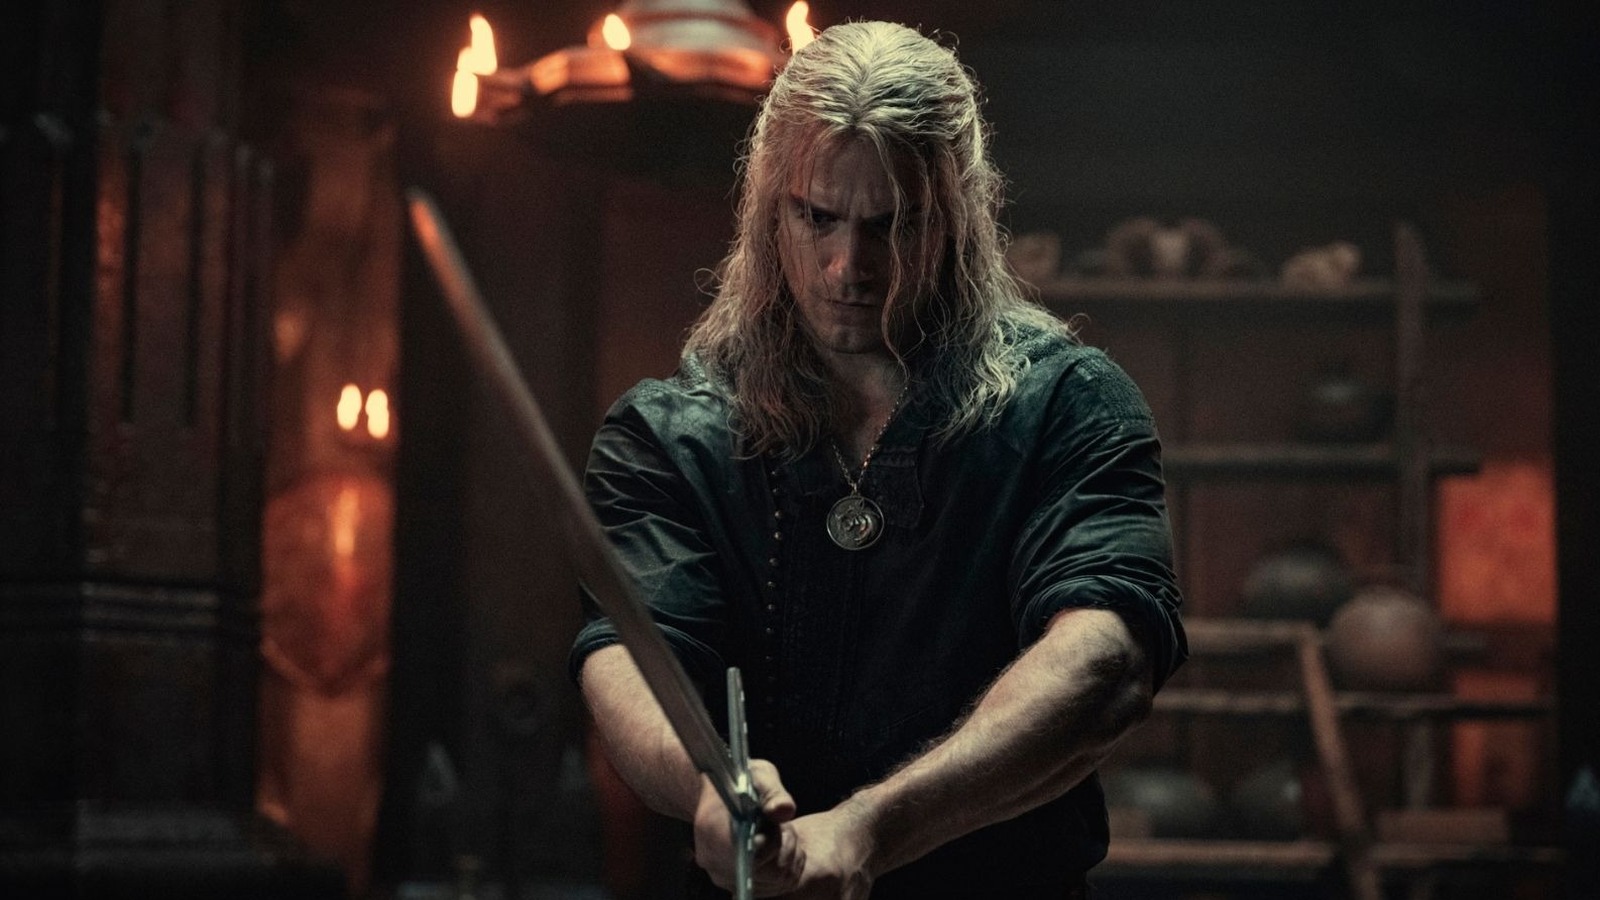 The Witcher - Full Cast & Crew - TV Guide